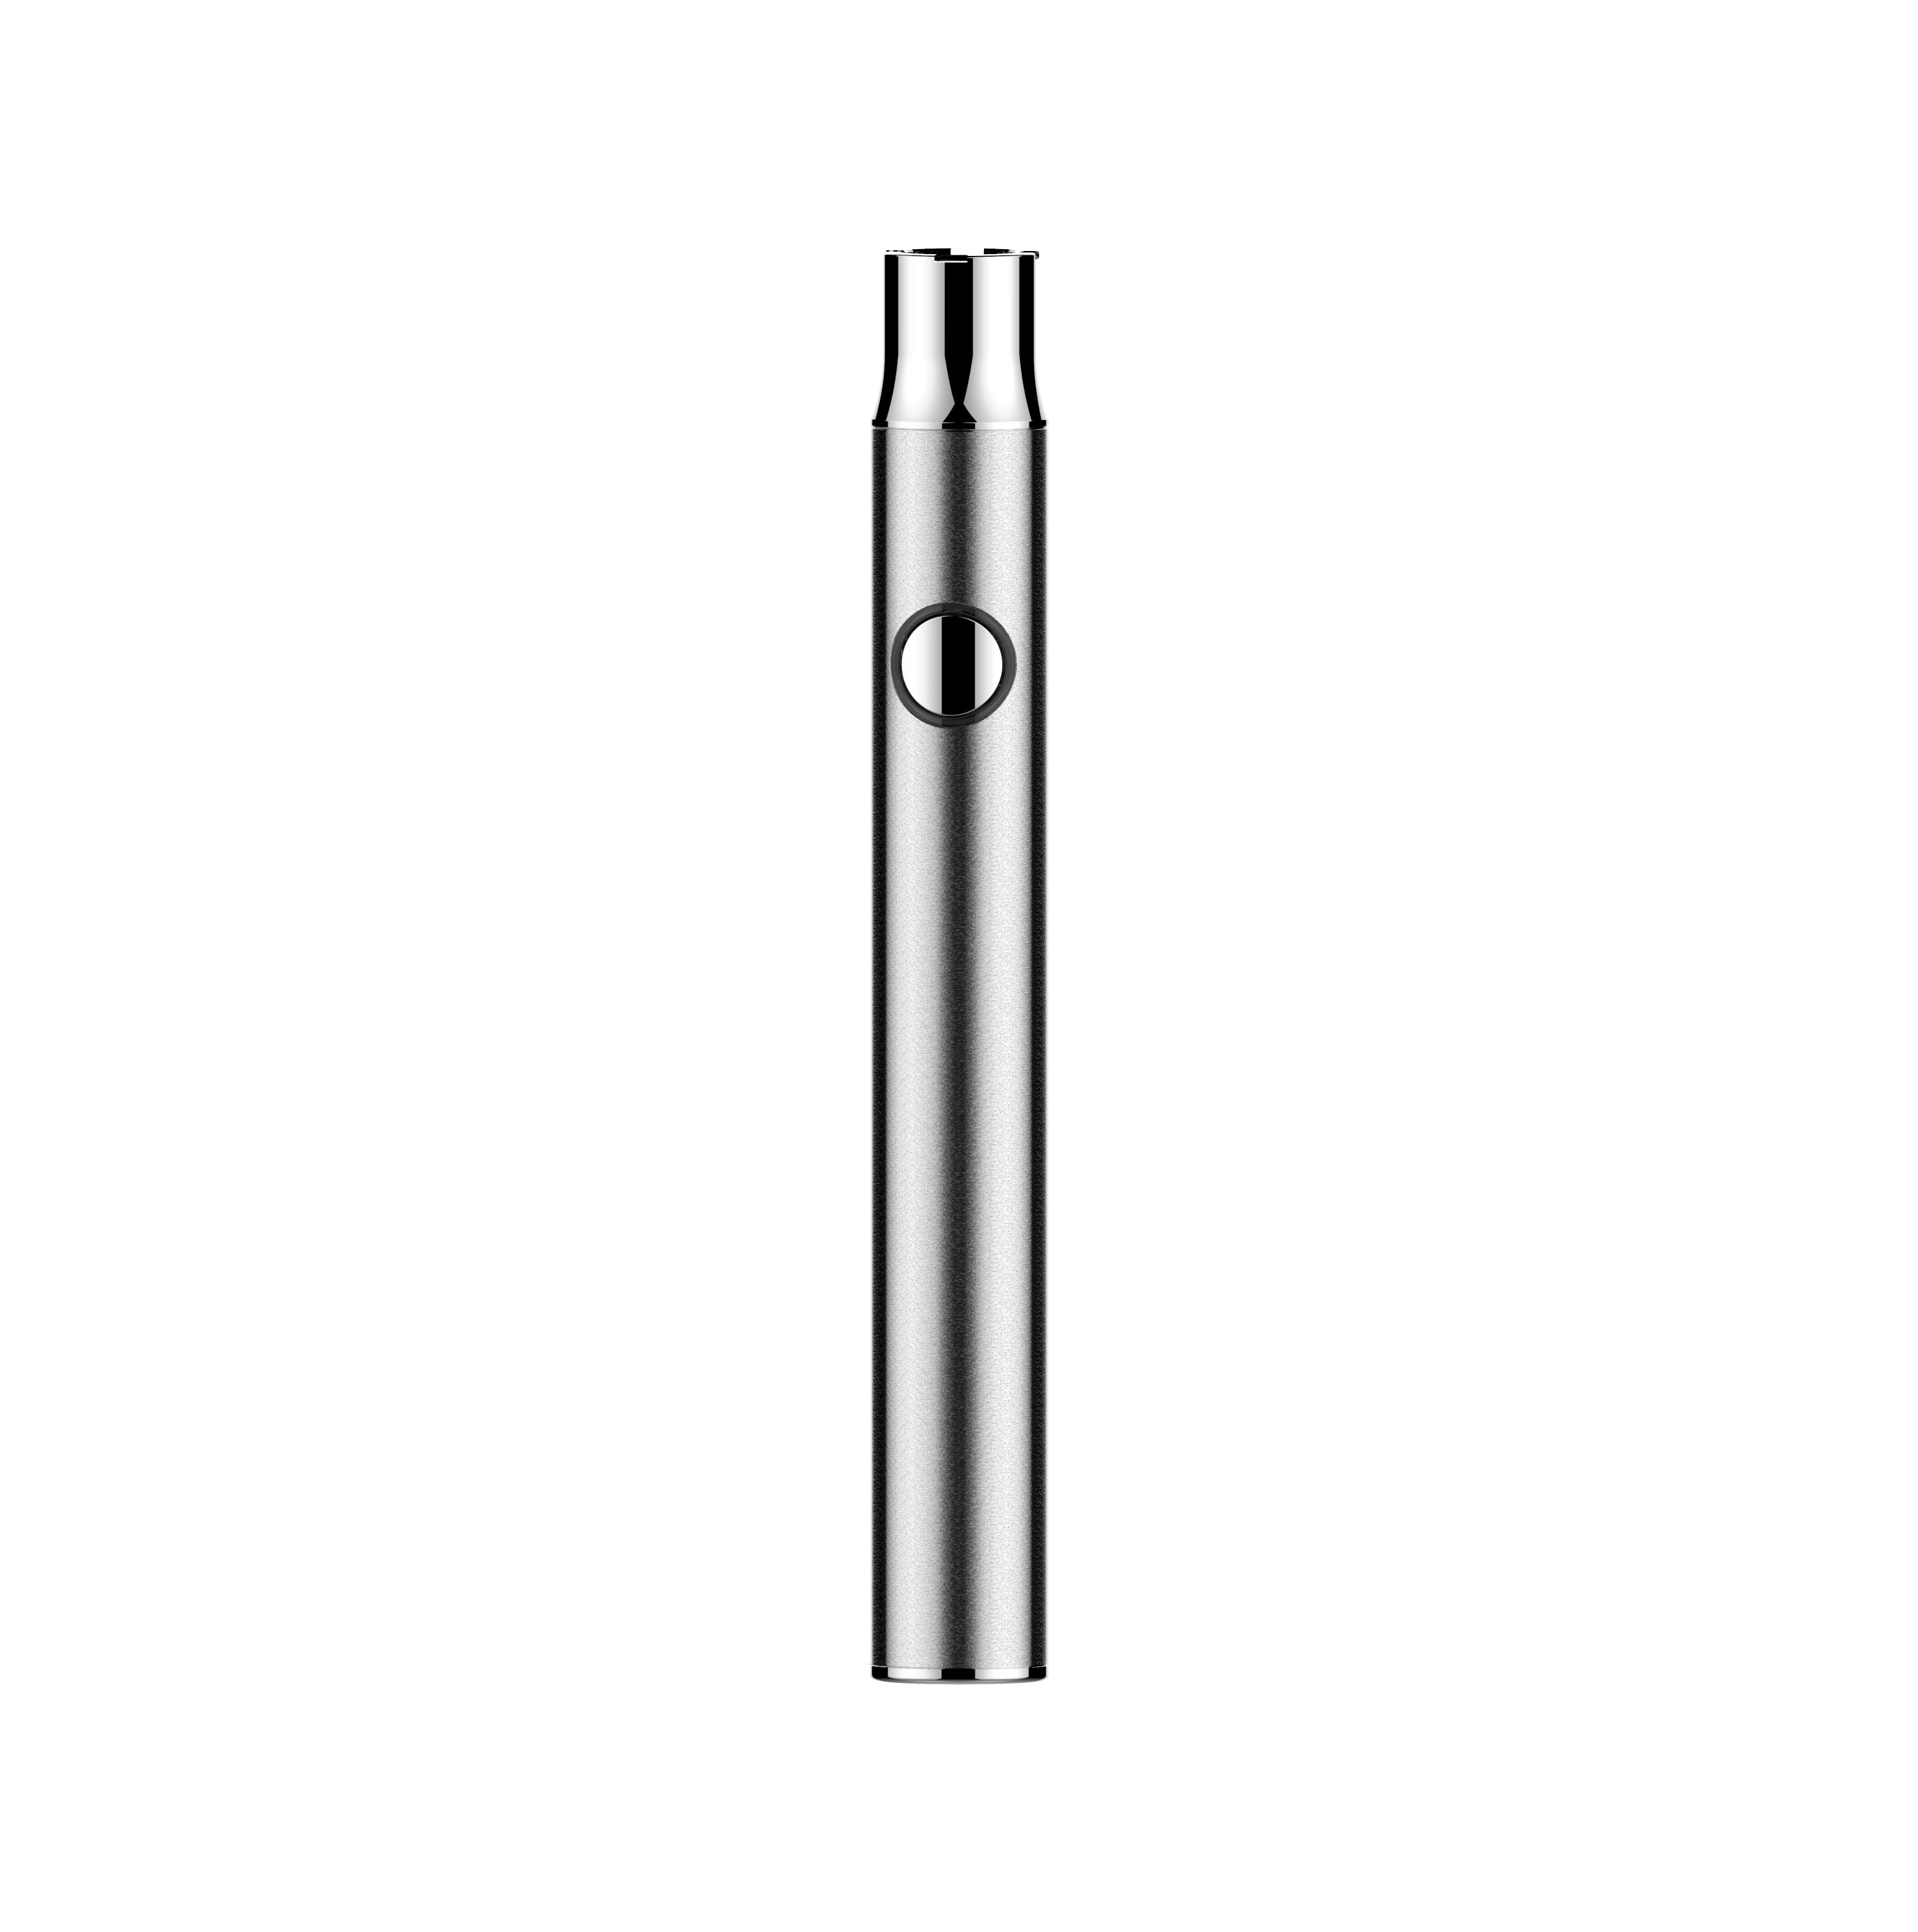 Cannanate™ B320 Super Power 510 Thread for High Standard Cartridge-Rechargeable 510 thread battery with the preheating model-what is the best battery for vape cartridge